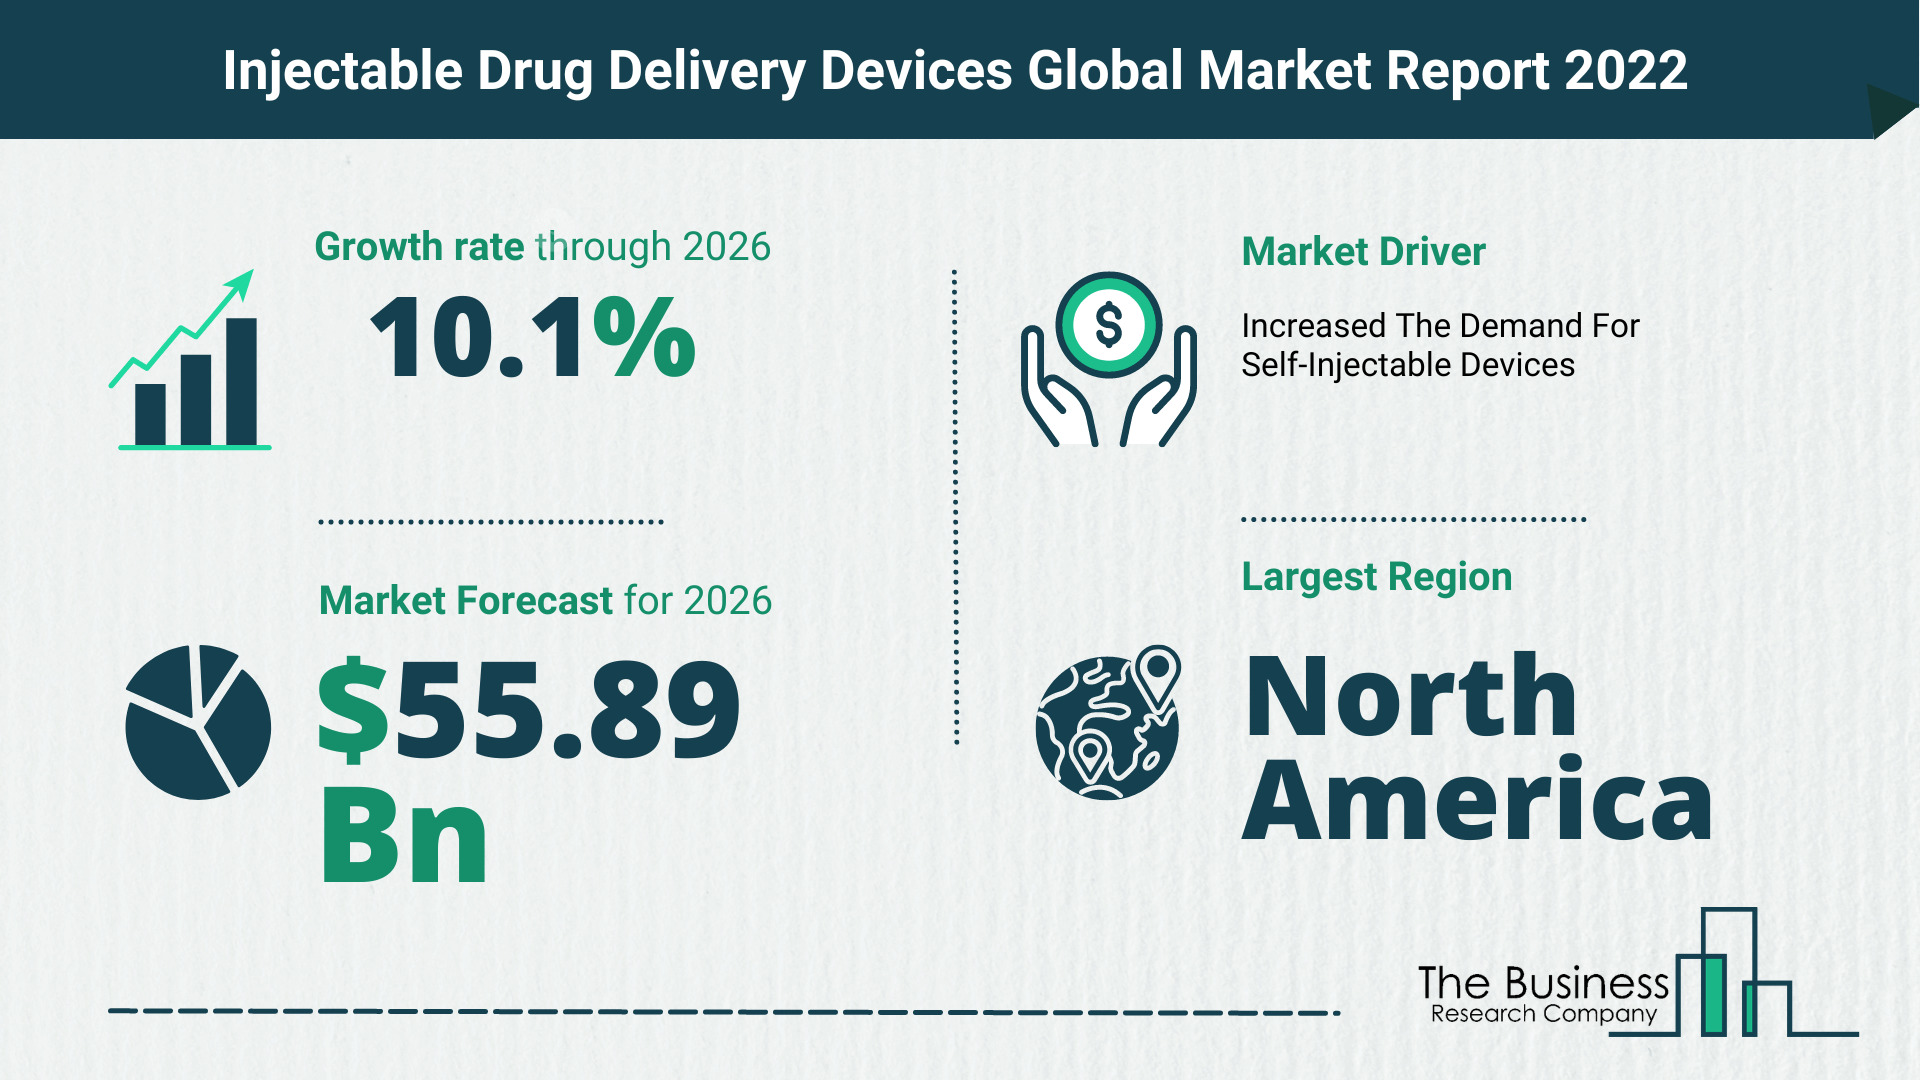 Global Injectable Drug Delivery Devices Market